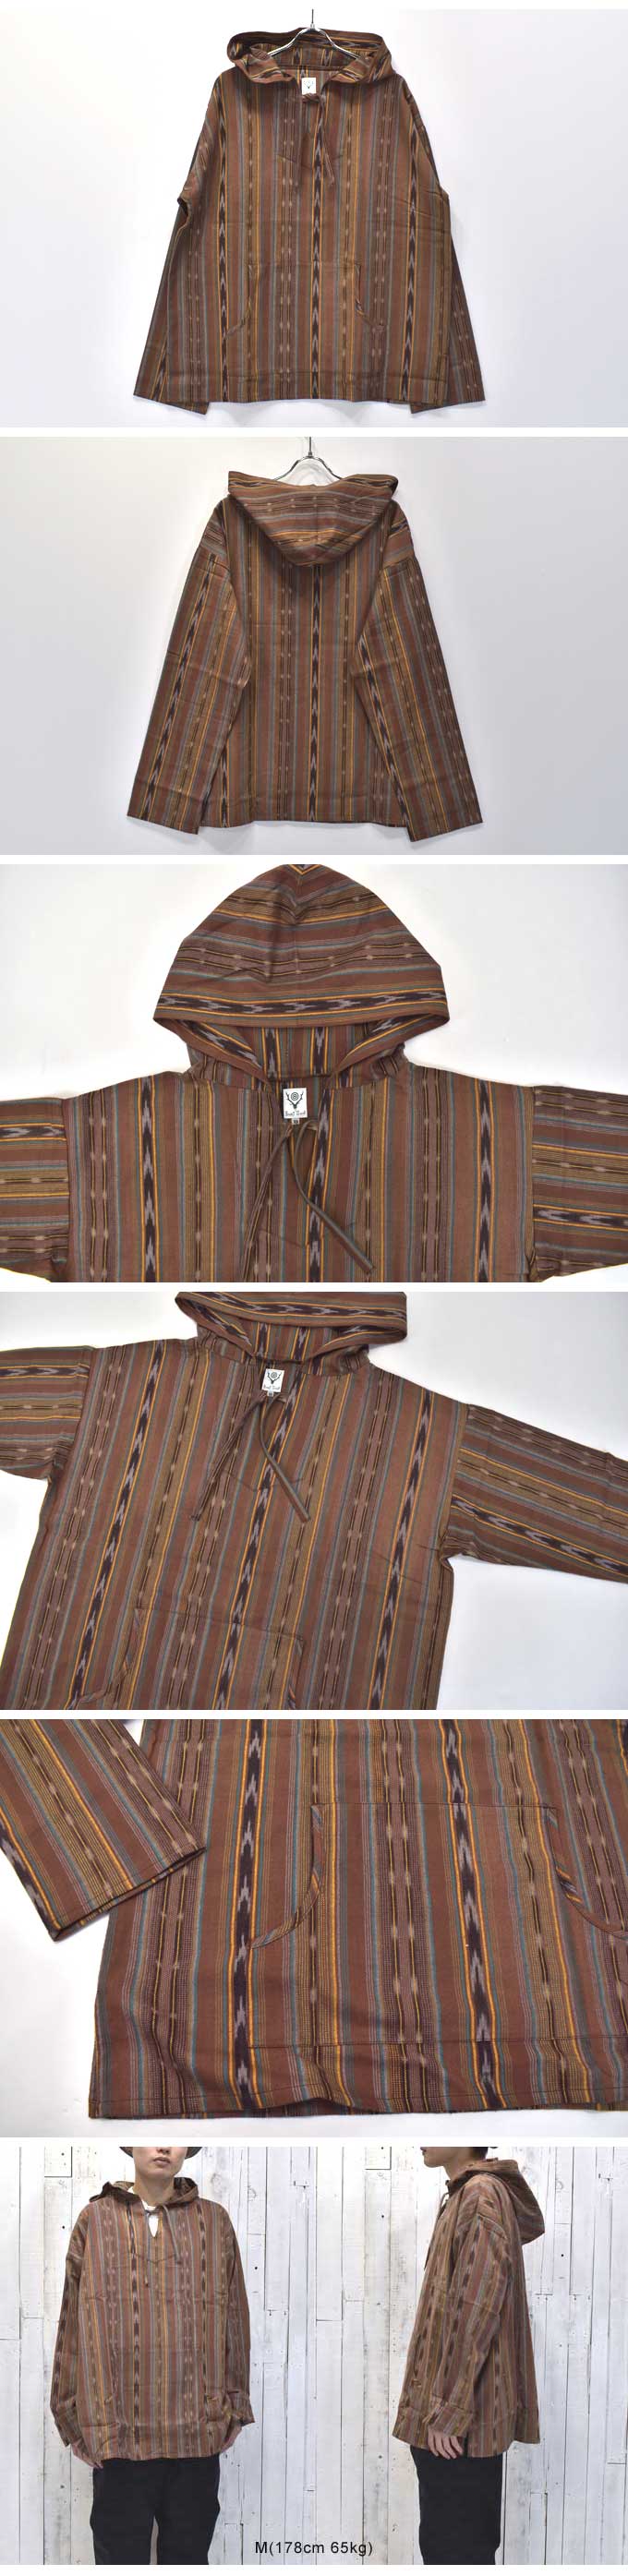 South2 West8 Mexican Parka (Cotton Cloth / Ikat Pattern)【価格はお問い合わせください。】